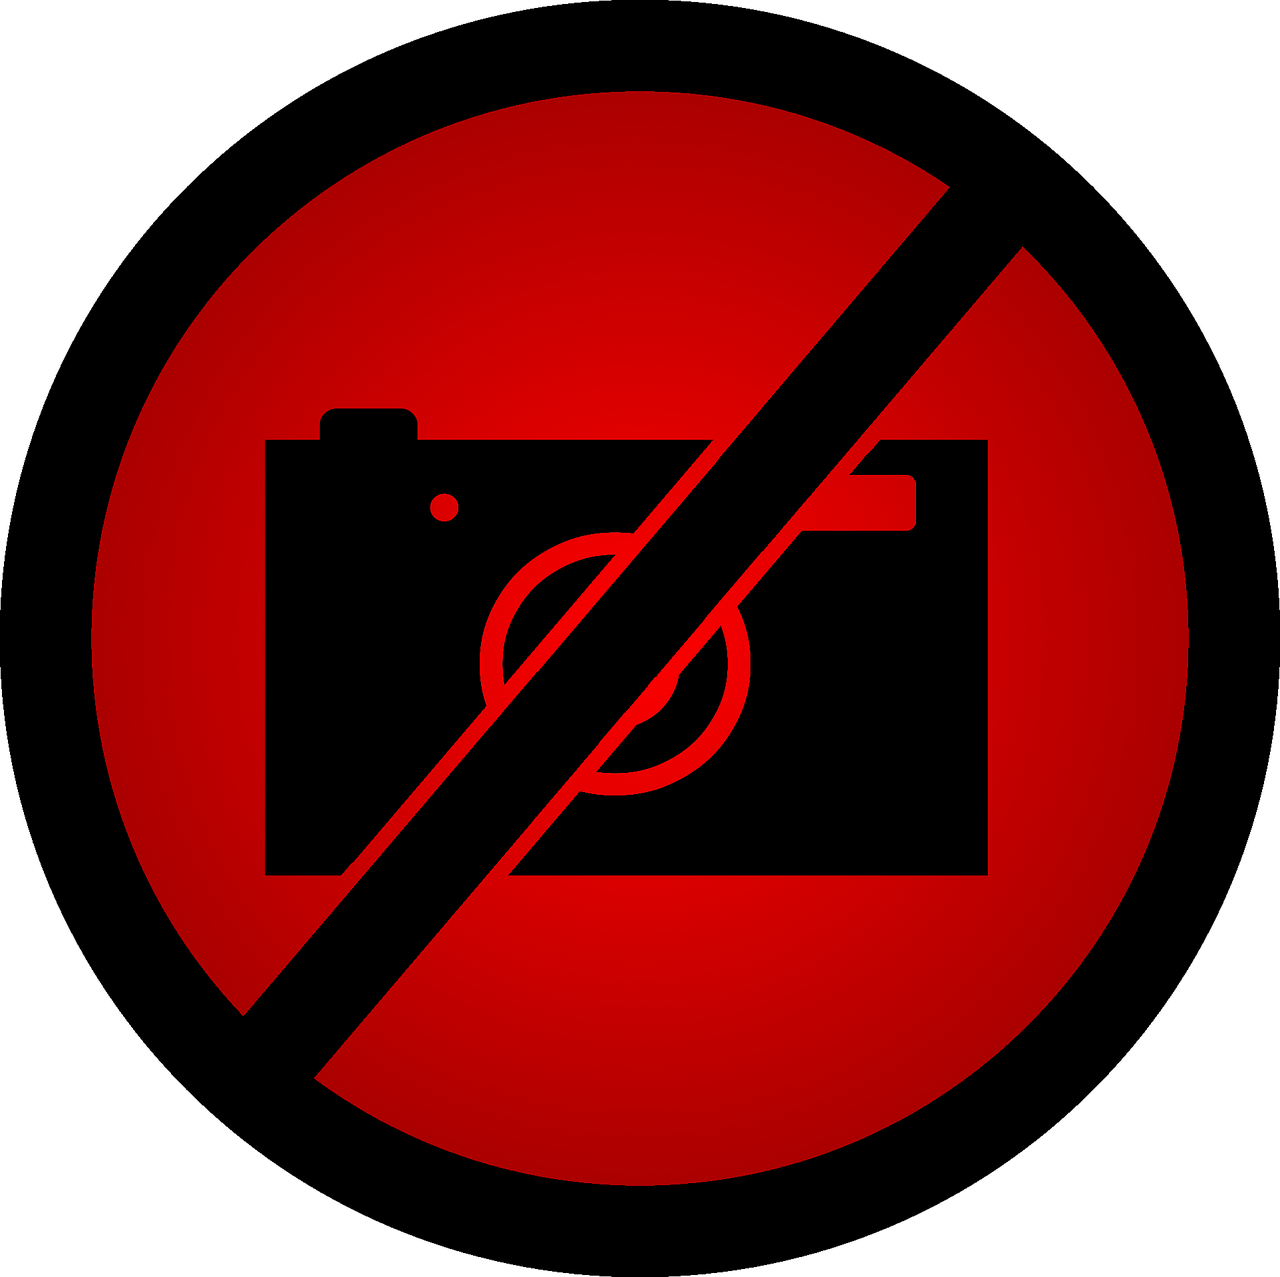 not to take pictures, prohibition of taking photos, red-2211278.jpg